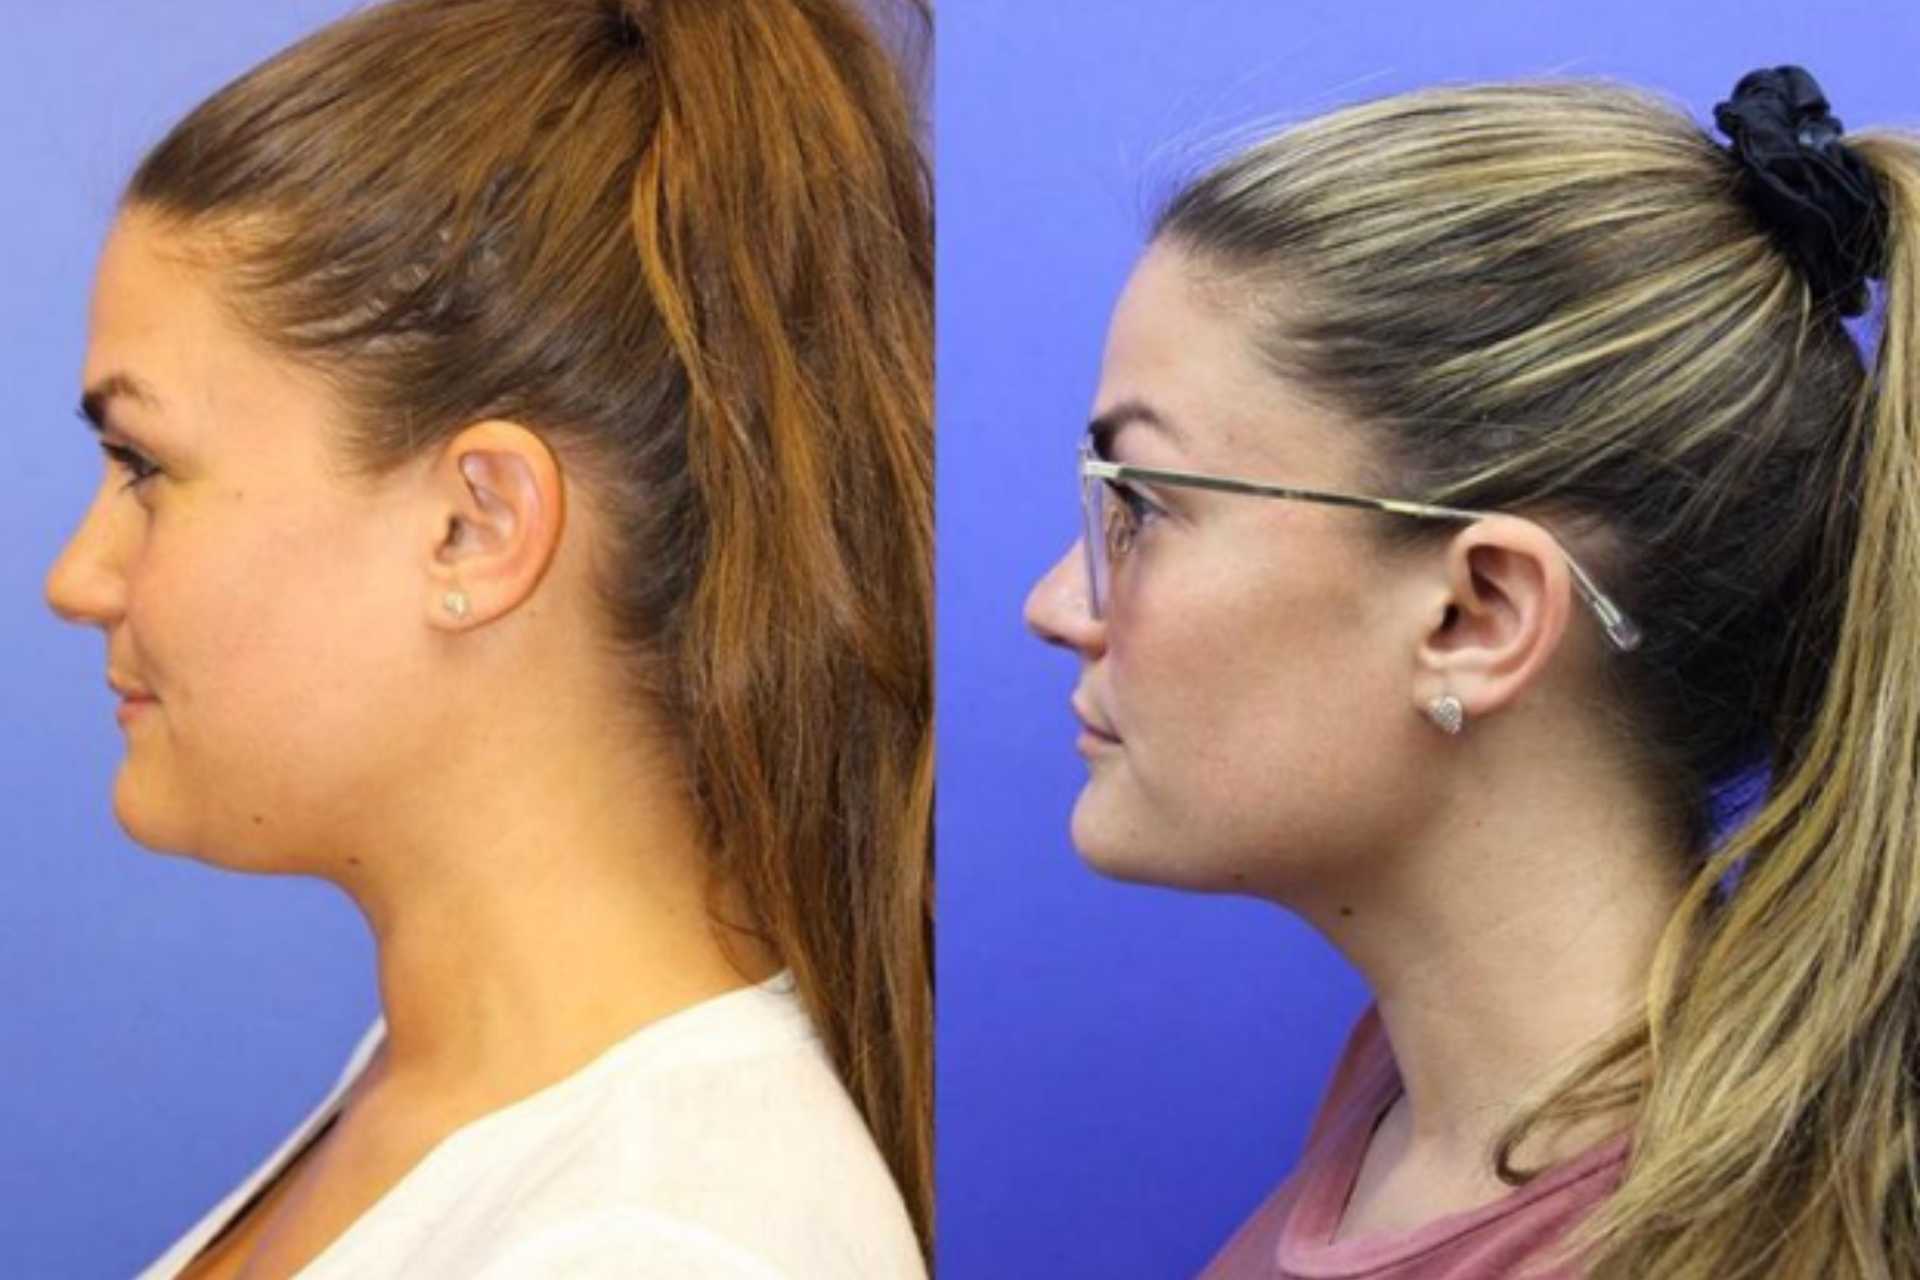 How Long Does Kybella Last